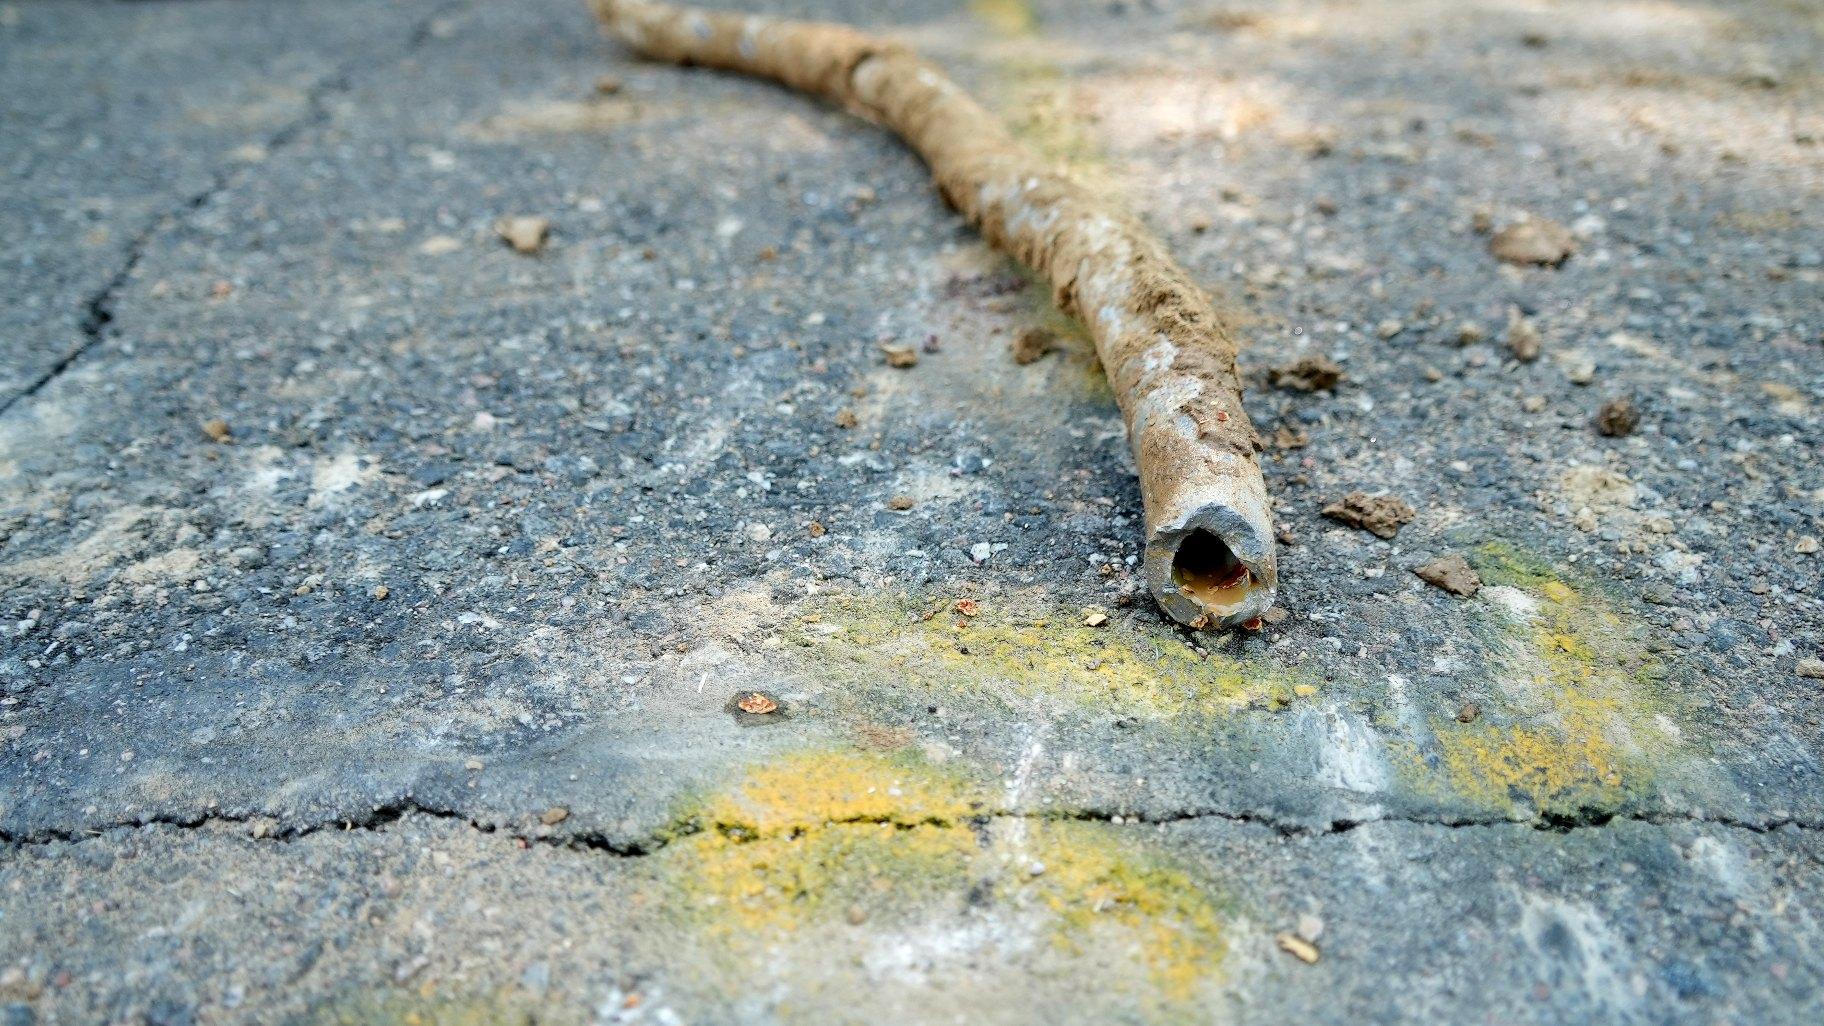 A lead water service line from 1927 lays on the ground on a residential street after being removed on June 17, 2021, in Denver. (AP Photo / Brittany Peterson, File)